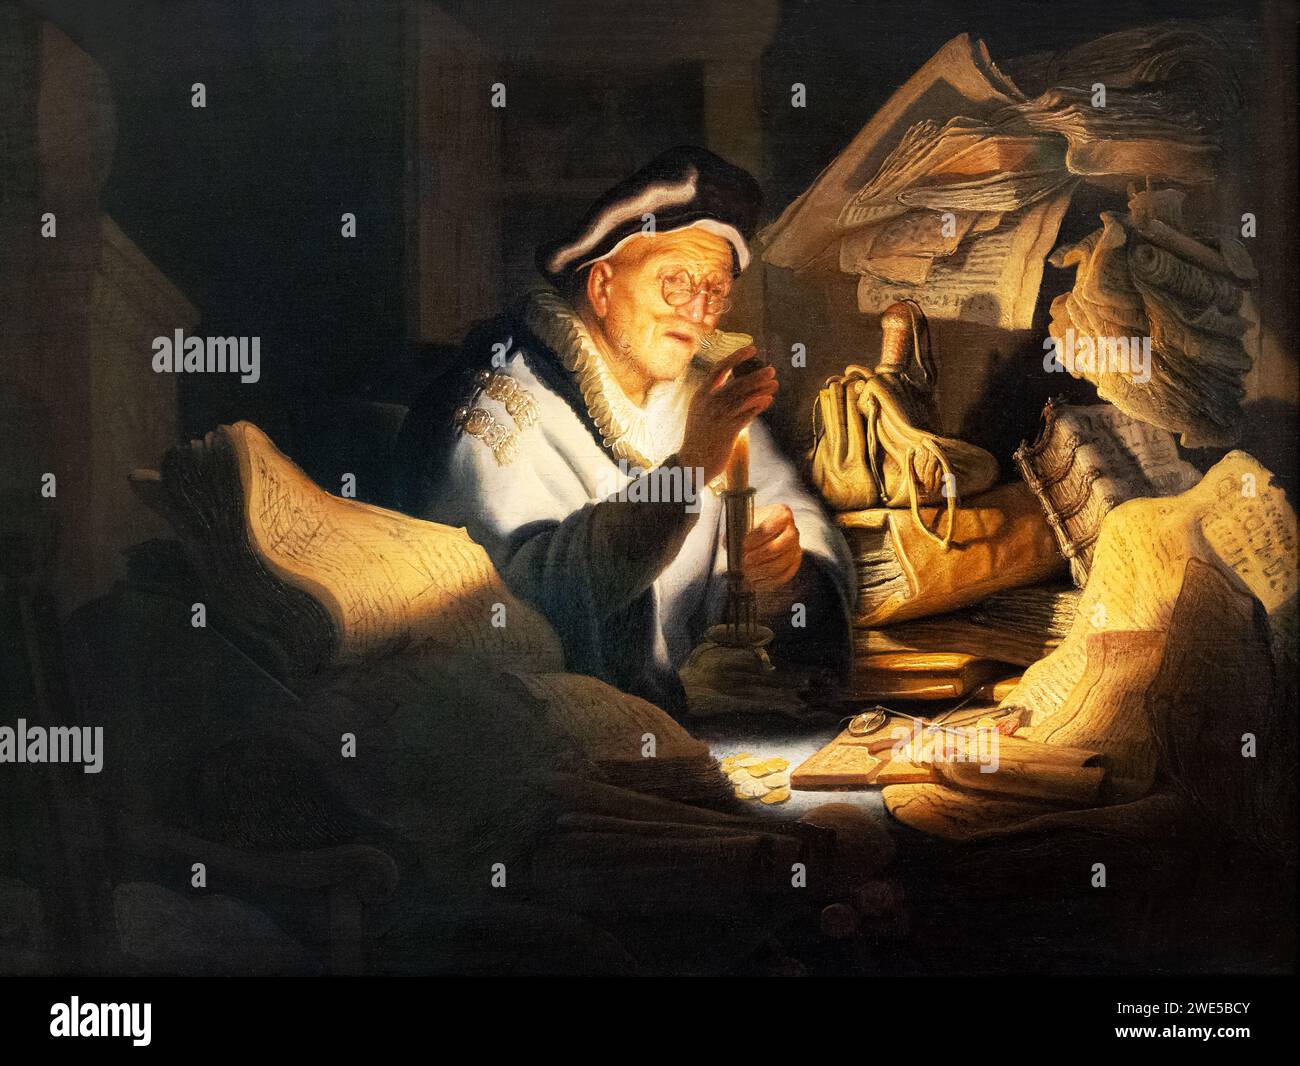 Rembrandt Harmenszoon van Rijn, or Rembrandt painting; 'The Money Changer' or 'The Parable of the Rich Fool', 1627;  Dutch Golden Age paintings. Stock Photo